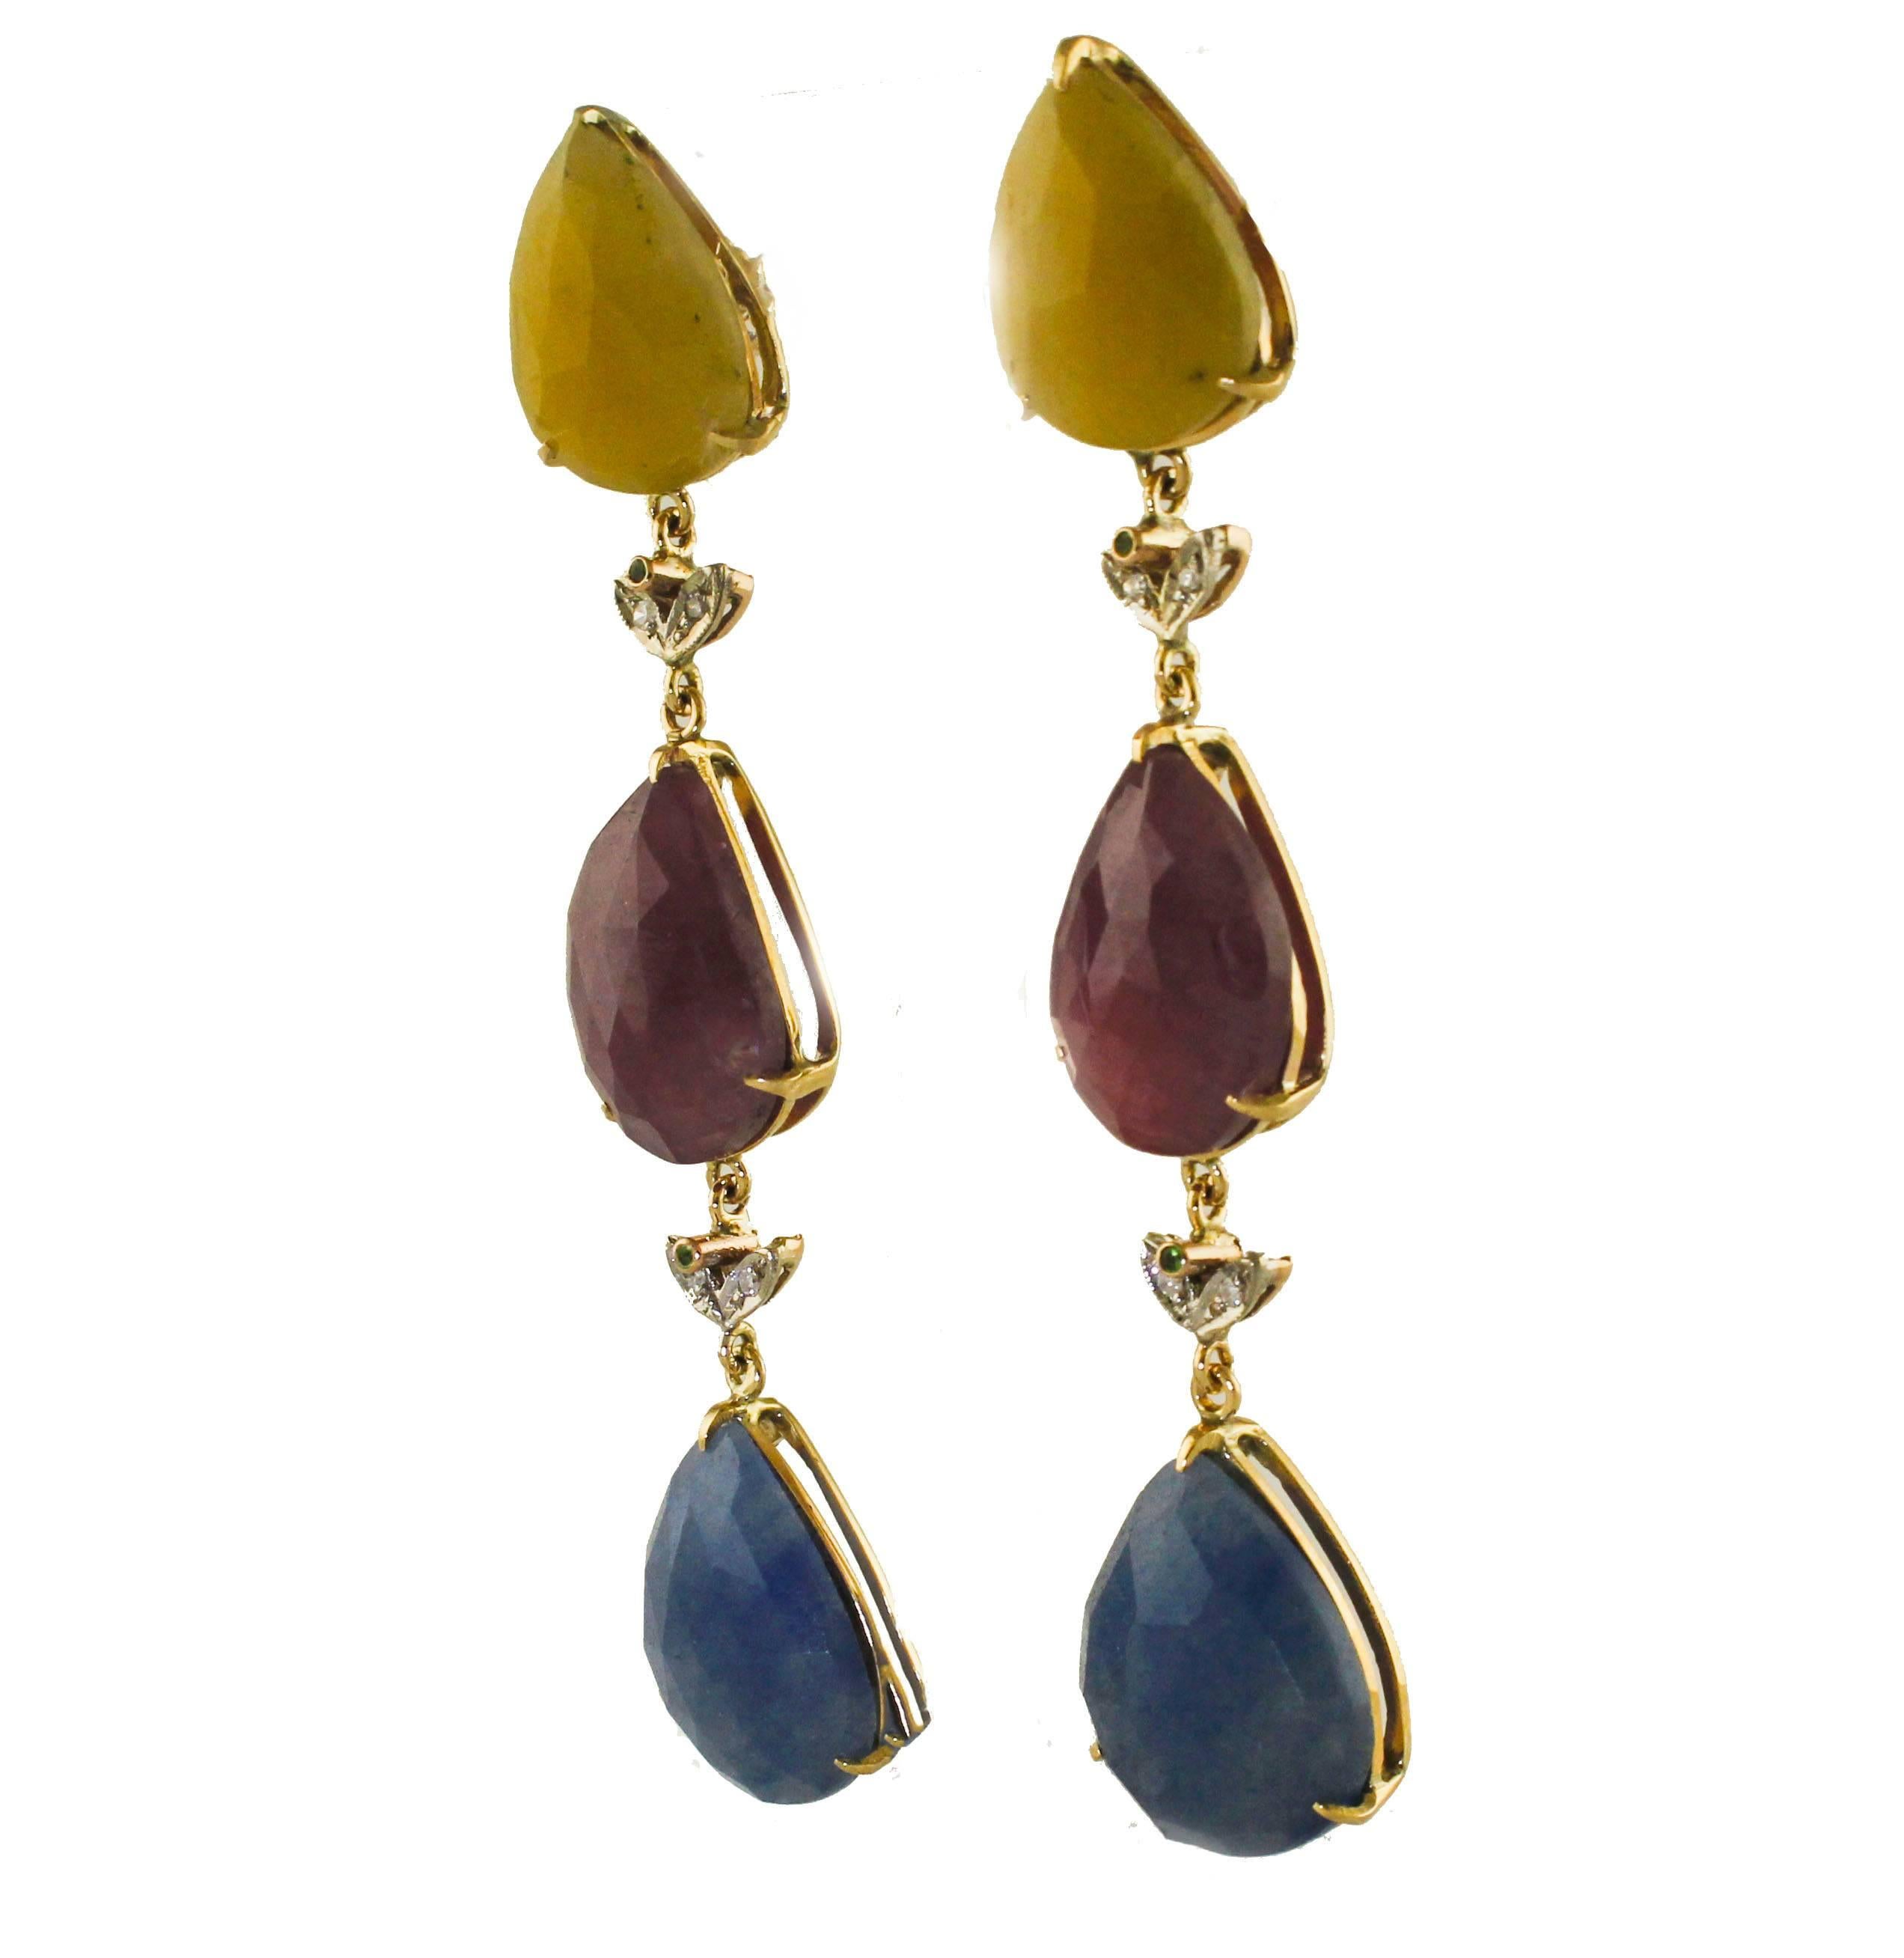 Fantastic drop earrings in 9 kt rose gold , (7.8 cm lenght), composed by ct 48.50 yellow and blue sapphires, rubies and diamonds (0.09 ct) and tsavorite (0.0 6)between 3 colores stones
Yellow ,Blue Sapphires and Rubies ct 48.5
Diamonds ct